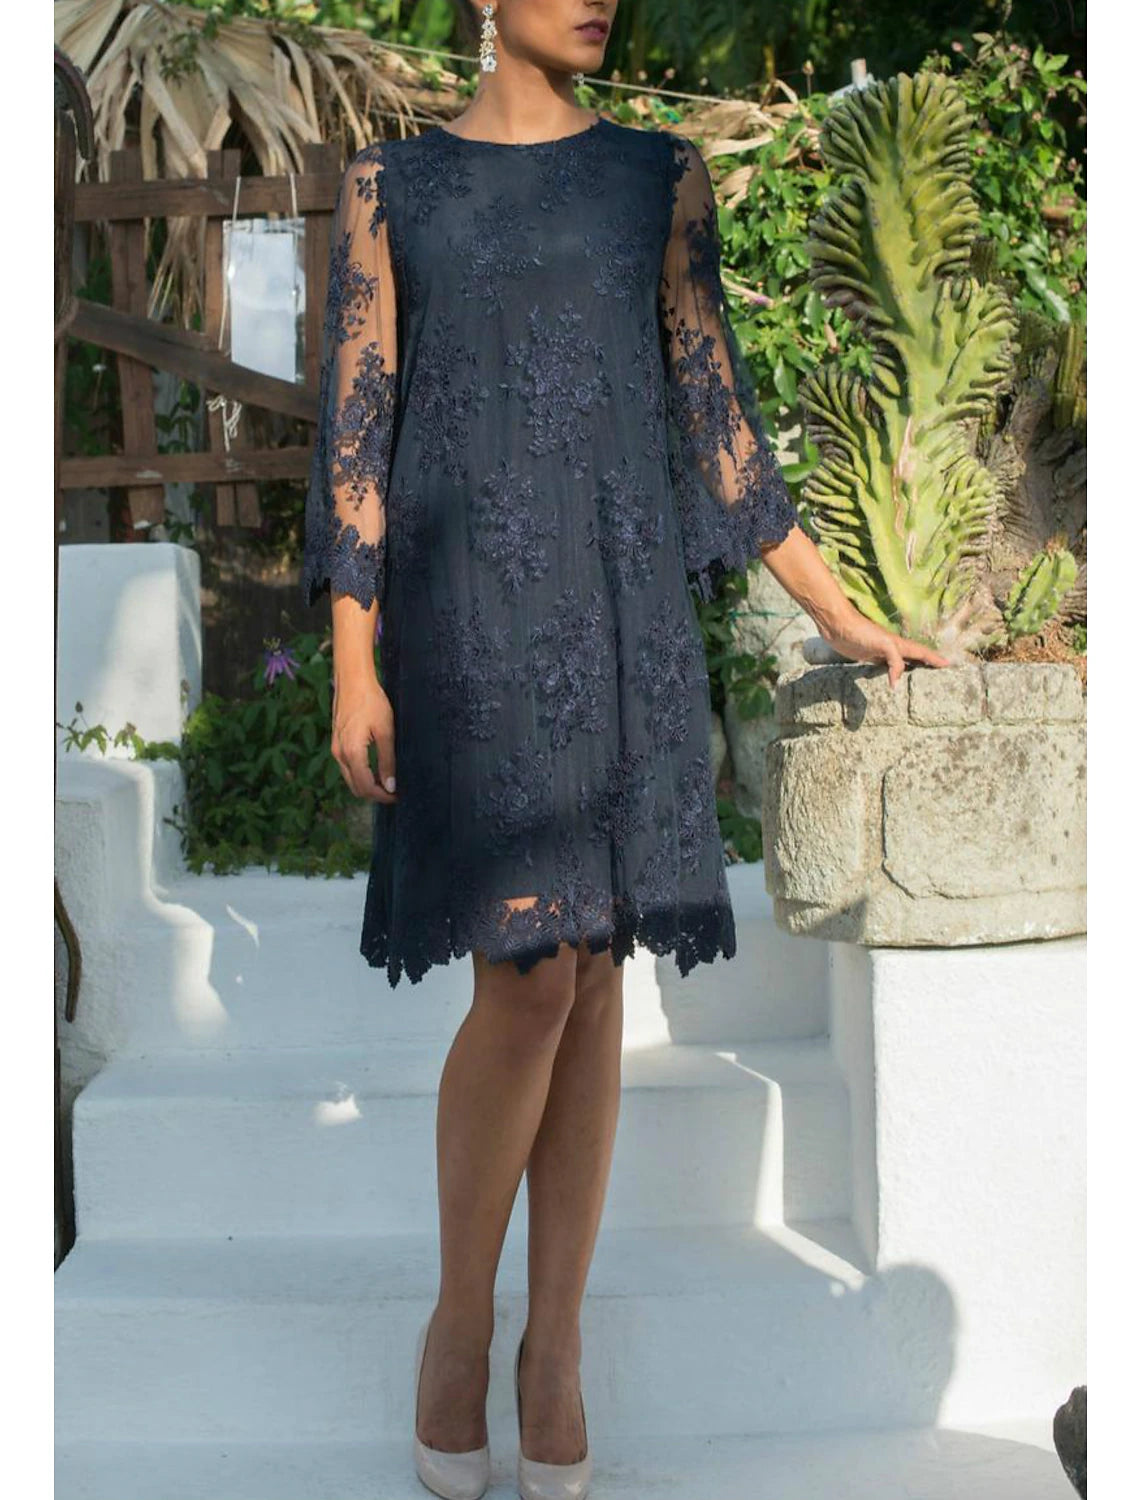 Sheath / Column Mother of the Bride Dress Fall Wedding Guest Elegant Jewel Neck Short / Mini Lace Tulle 3/4 Length Sleeve with Appliques